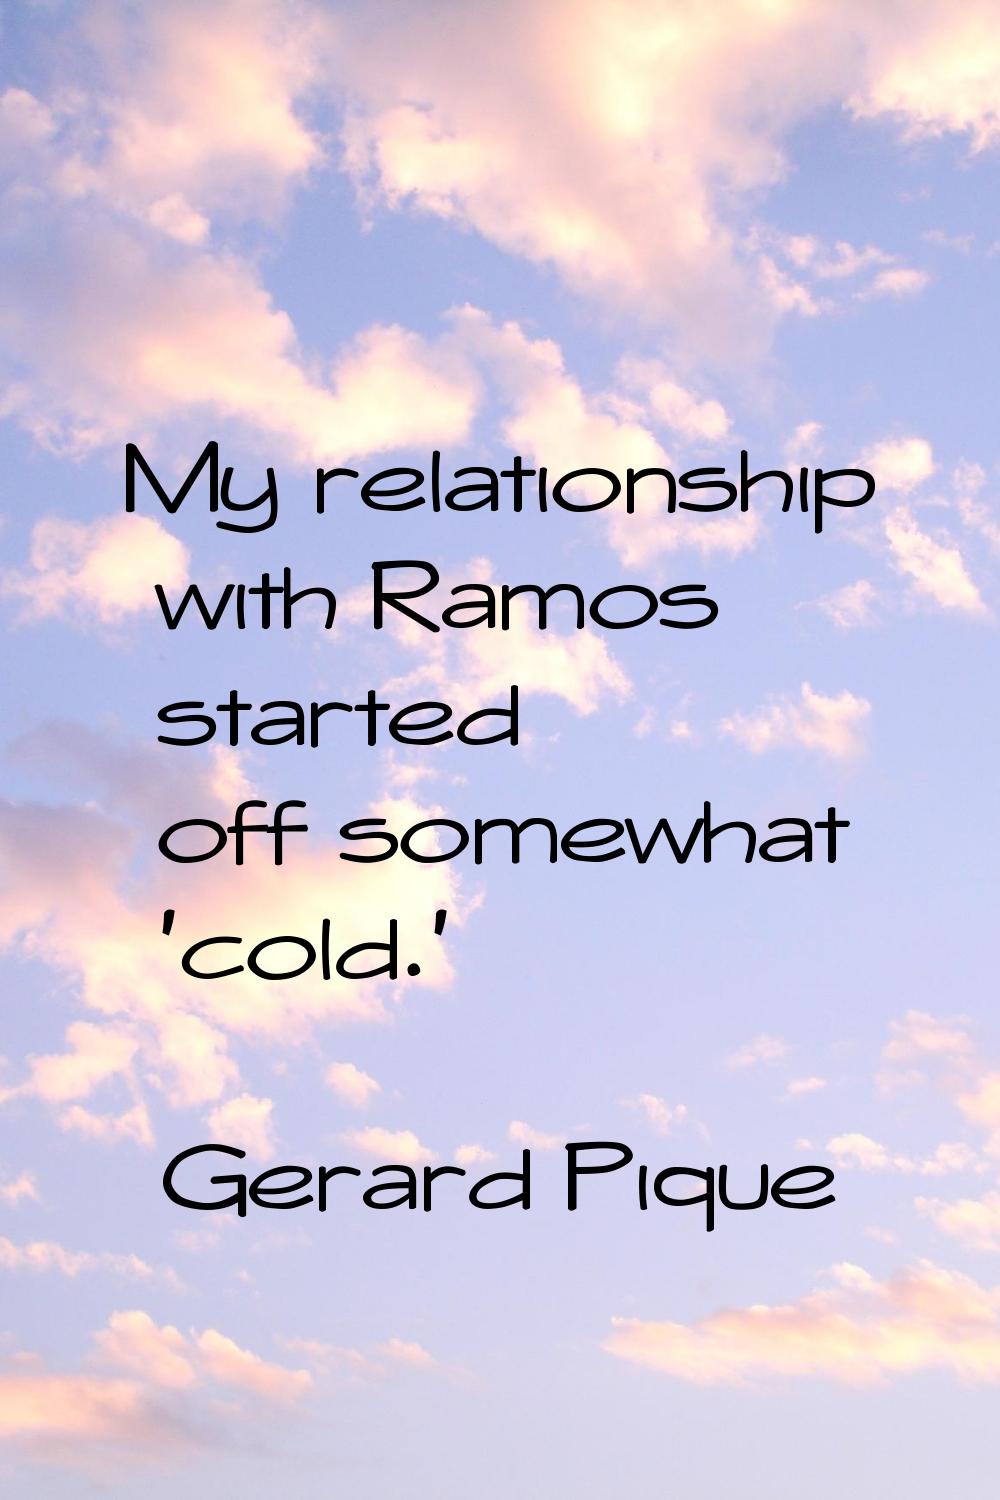 My relationship with Ramos started off somewhat 'cold.'